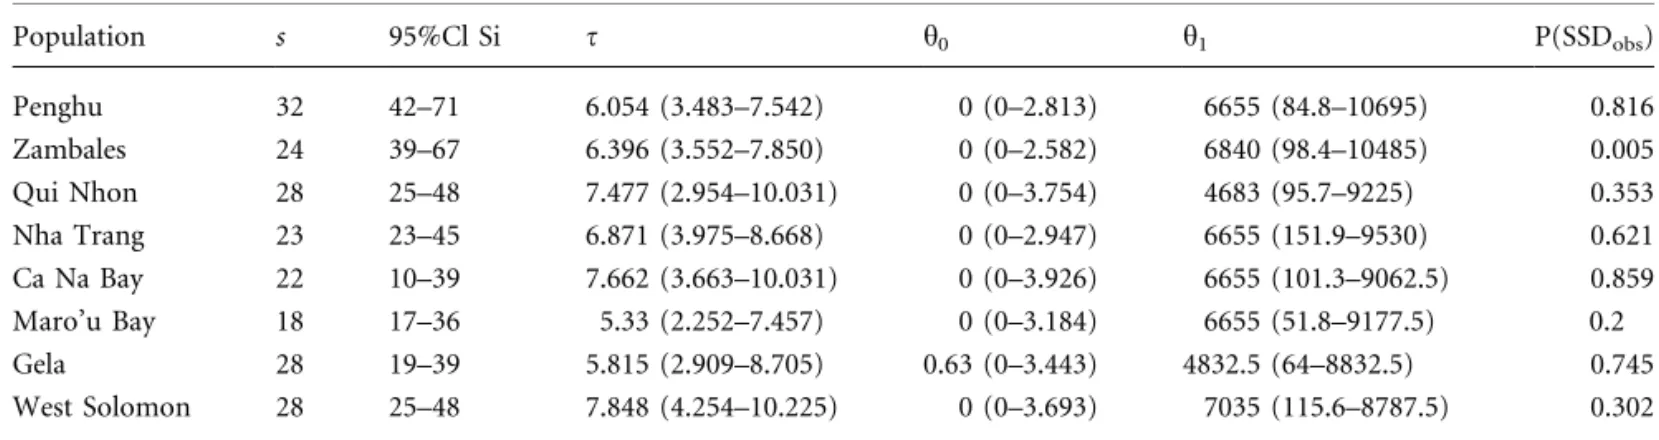 Table 3. Thallasoma hardwicki: Observed (s) and 95% Cl Confidence Interval of Simulated (95% Cl Si) Polymorphic Sites as well as estimated Demographic Parameters (with their 95% Cl) in eight Populations of T